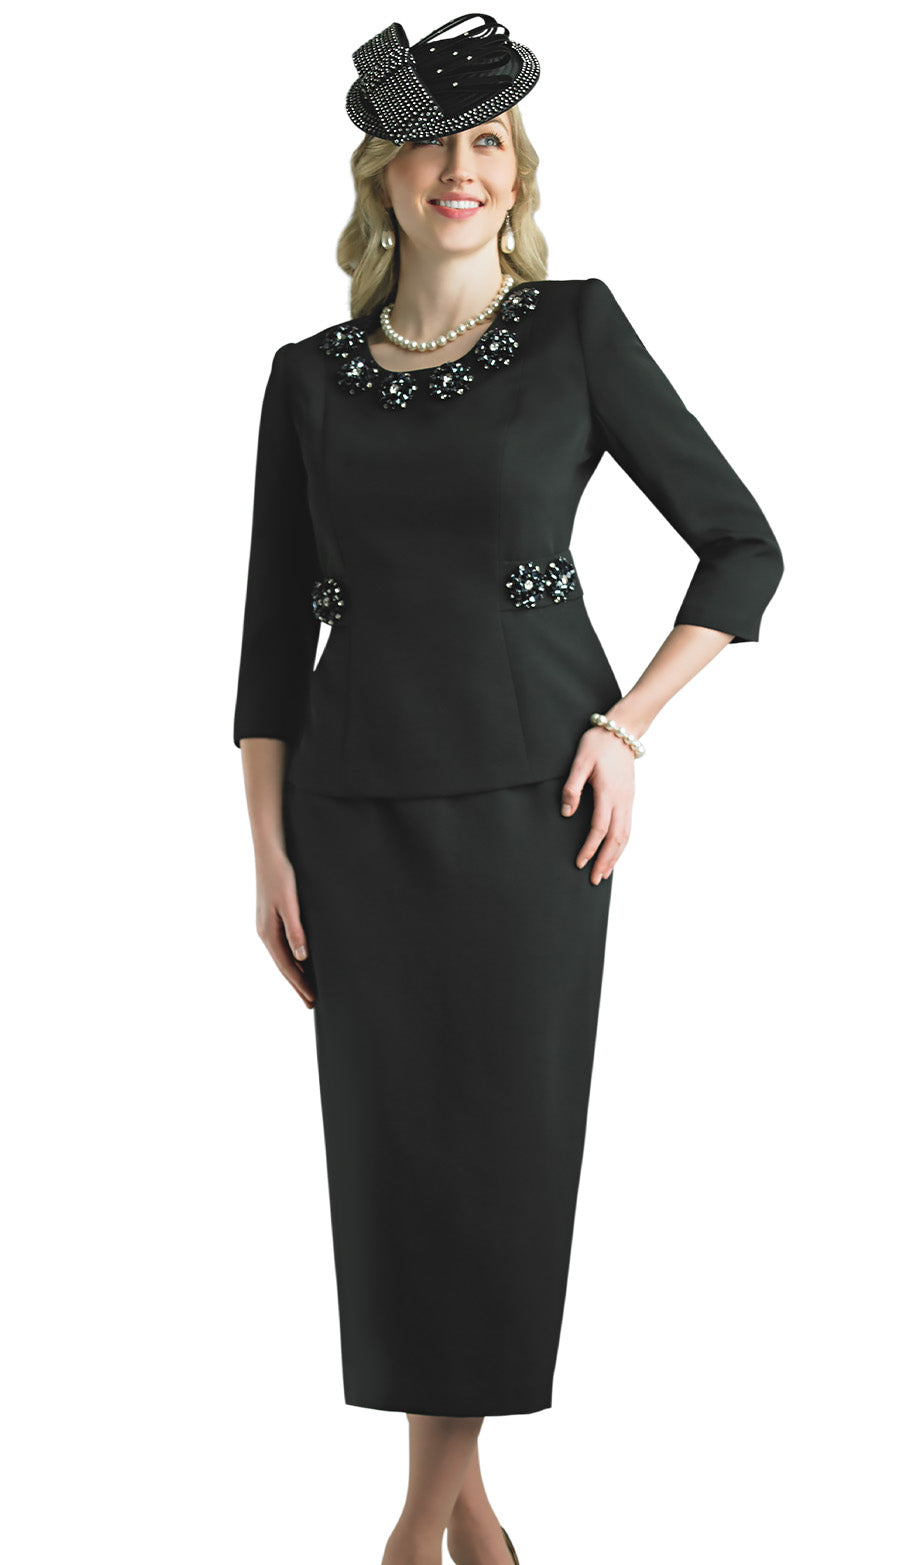 Black Church Suits For Women | Church suits for less